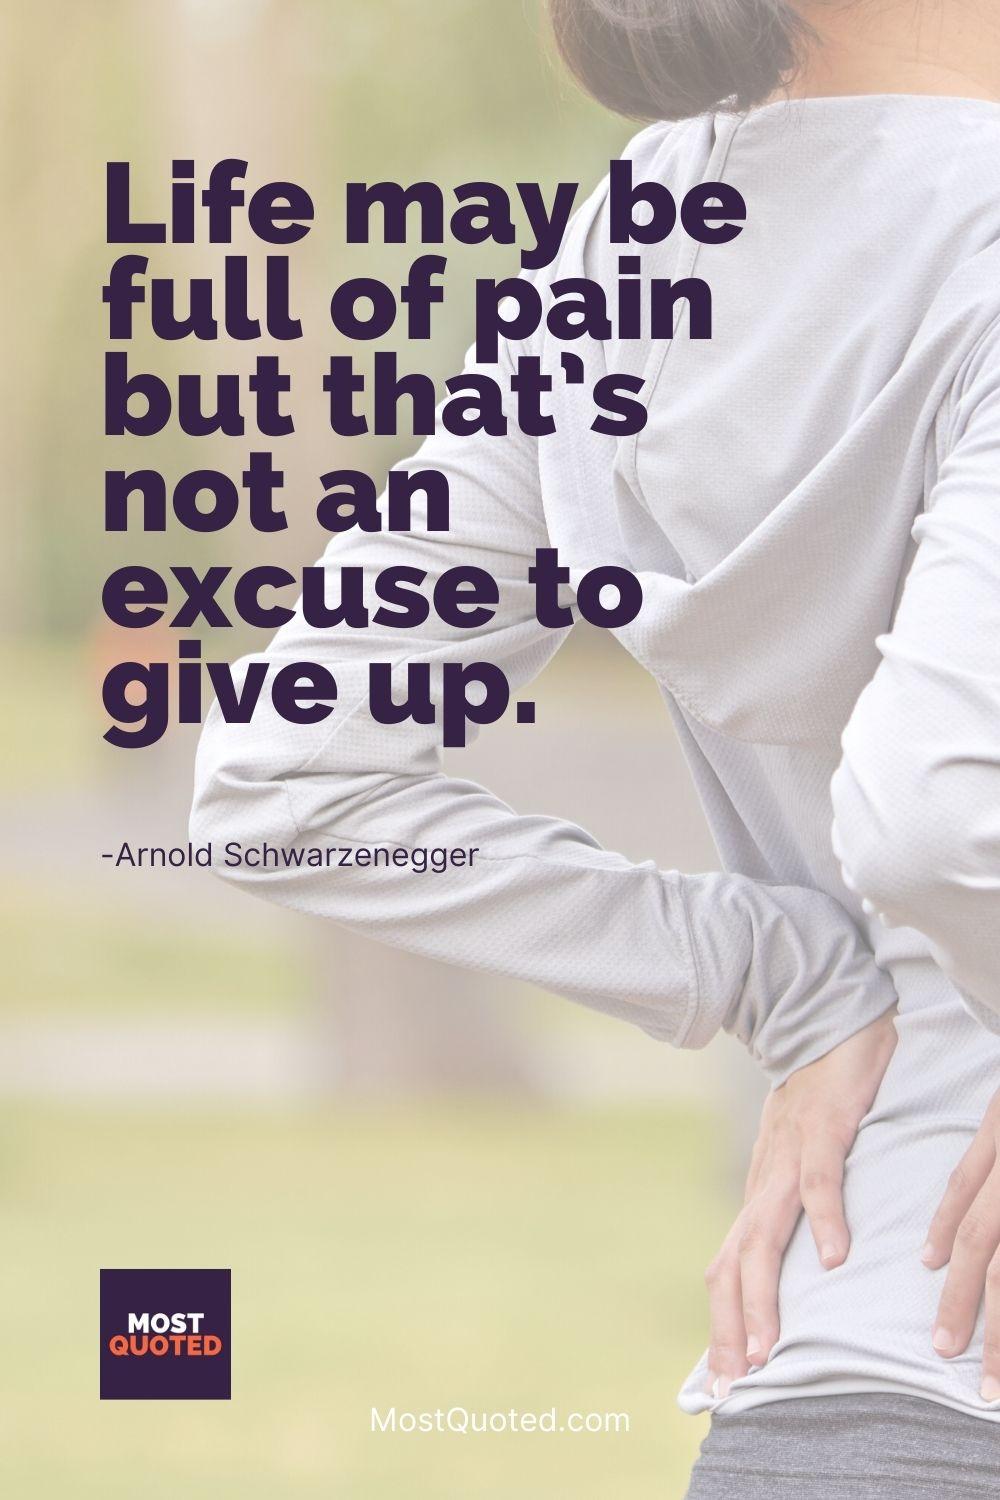 Life may be full of pain but that’s not an excuse to give up. - Arnold Schwarzenegger